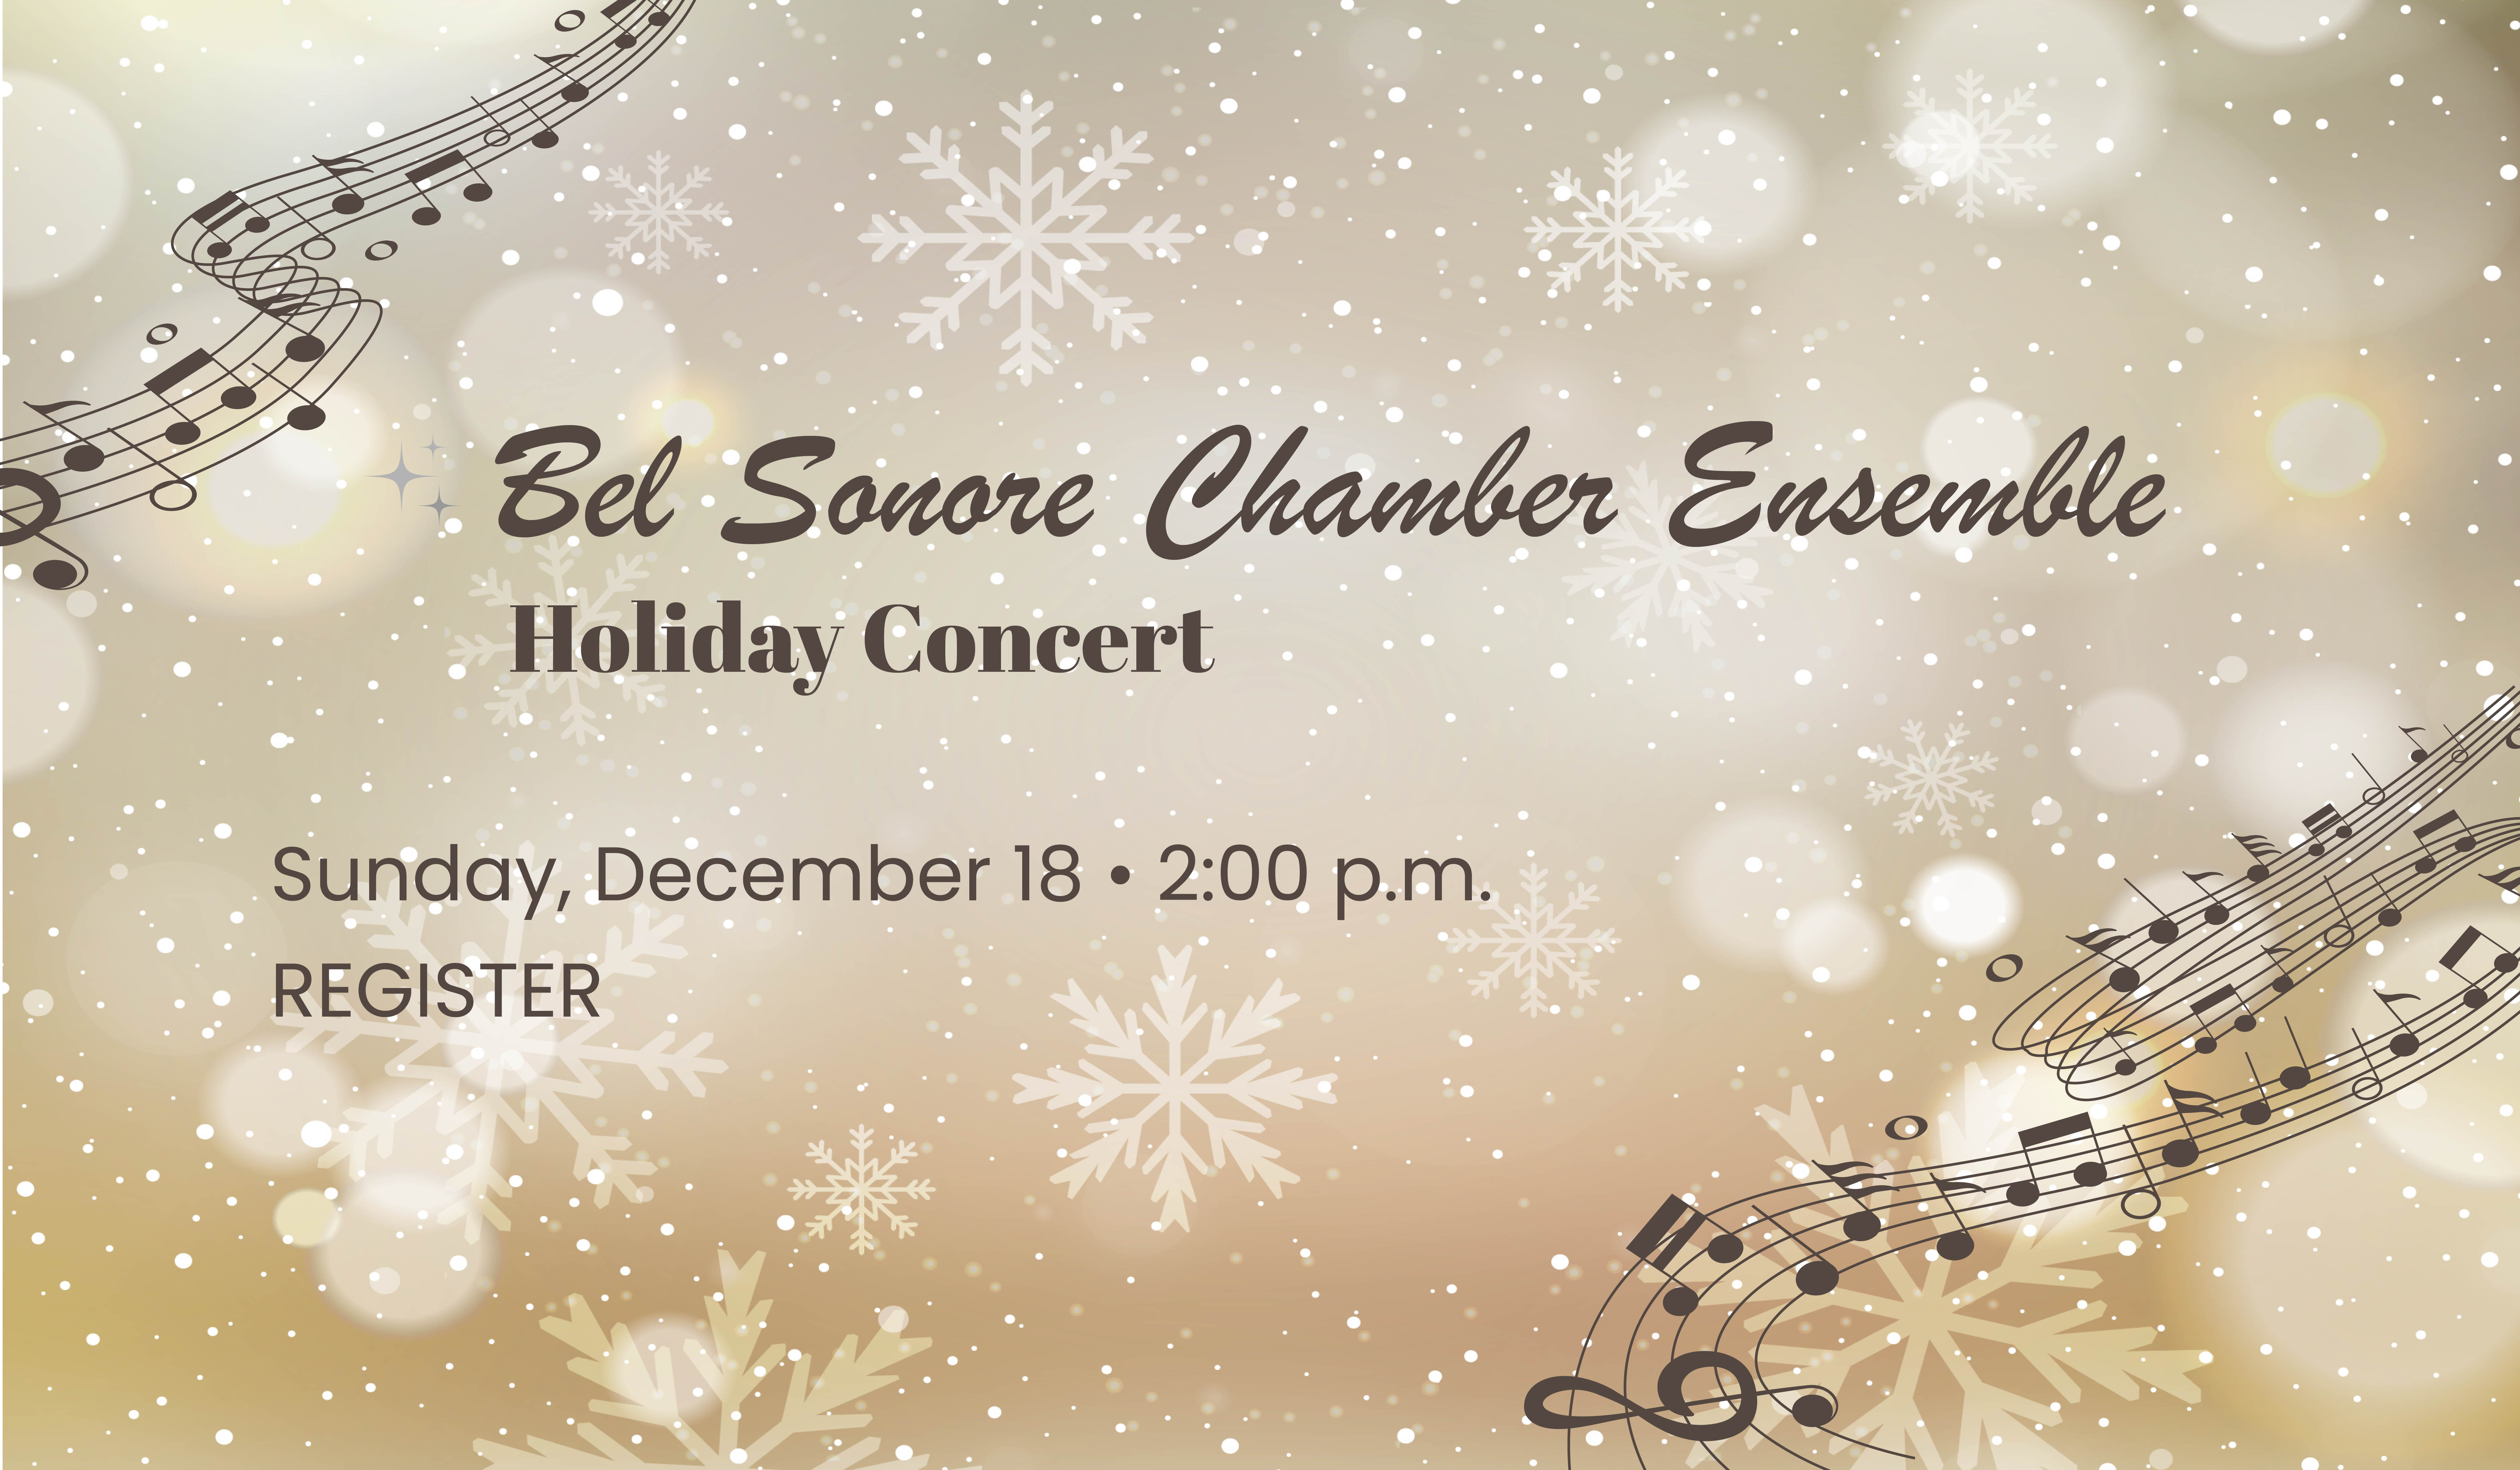 Bel Sonore holiday concert